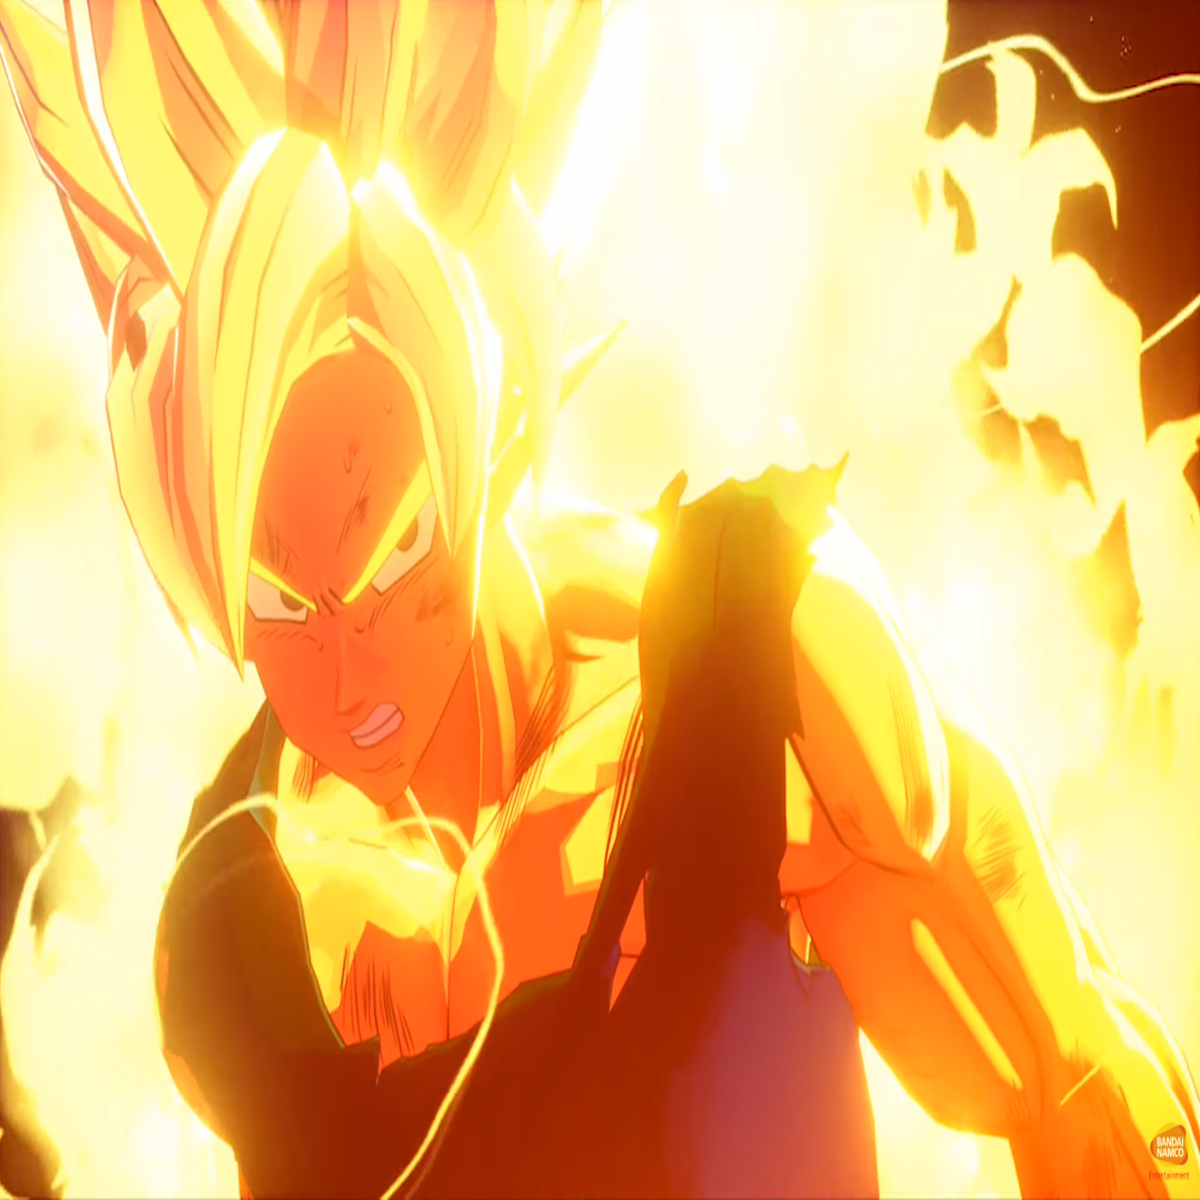 Dragon Ball Z: Kakarot will feature events from the Cell saga